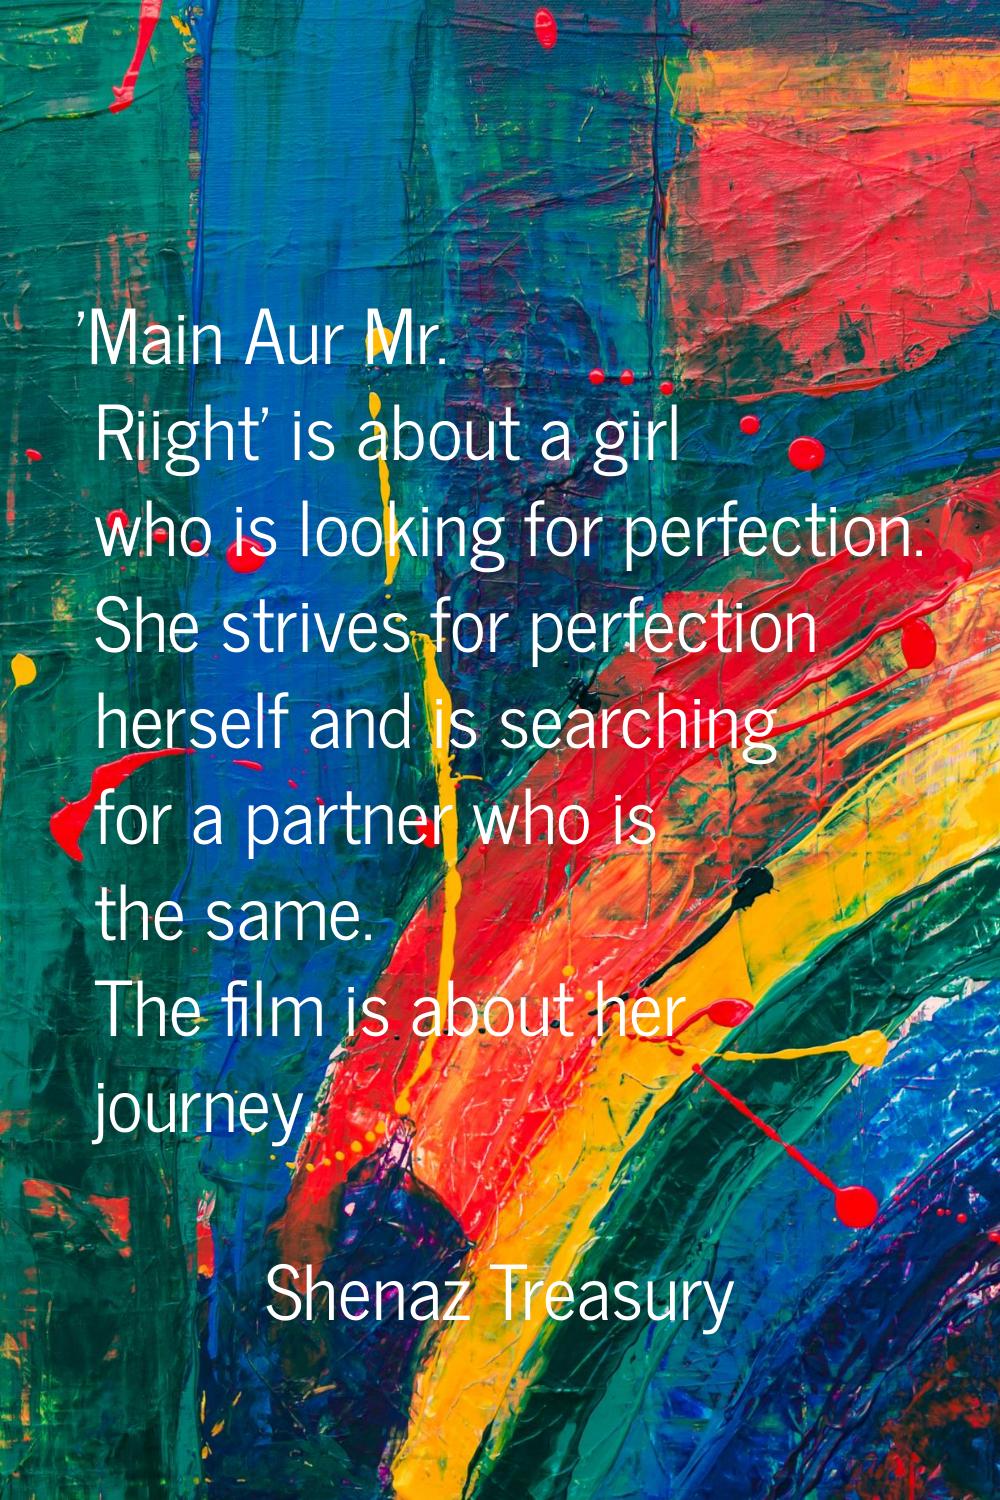 'Main Aur Mr. Riight' is about a girl who is looking for perfection. She strives for perfection her